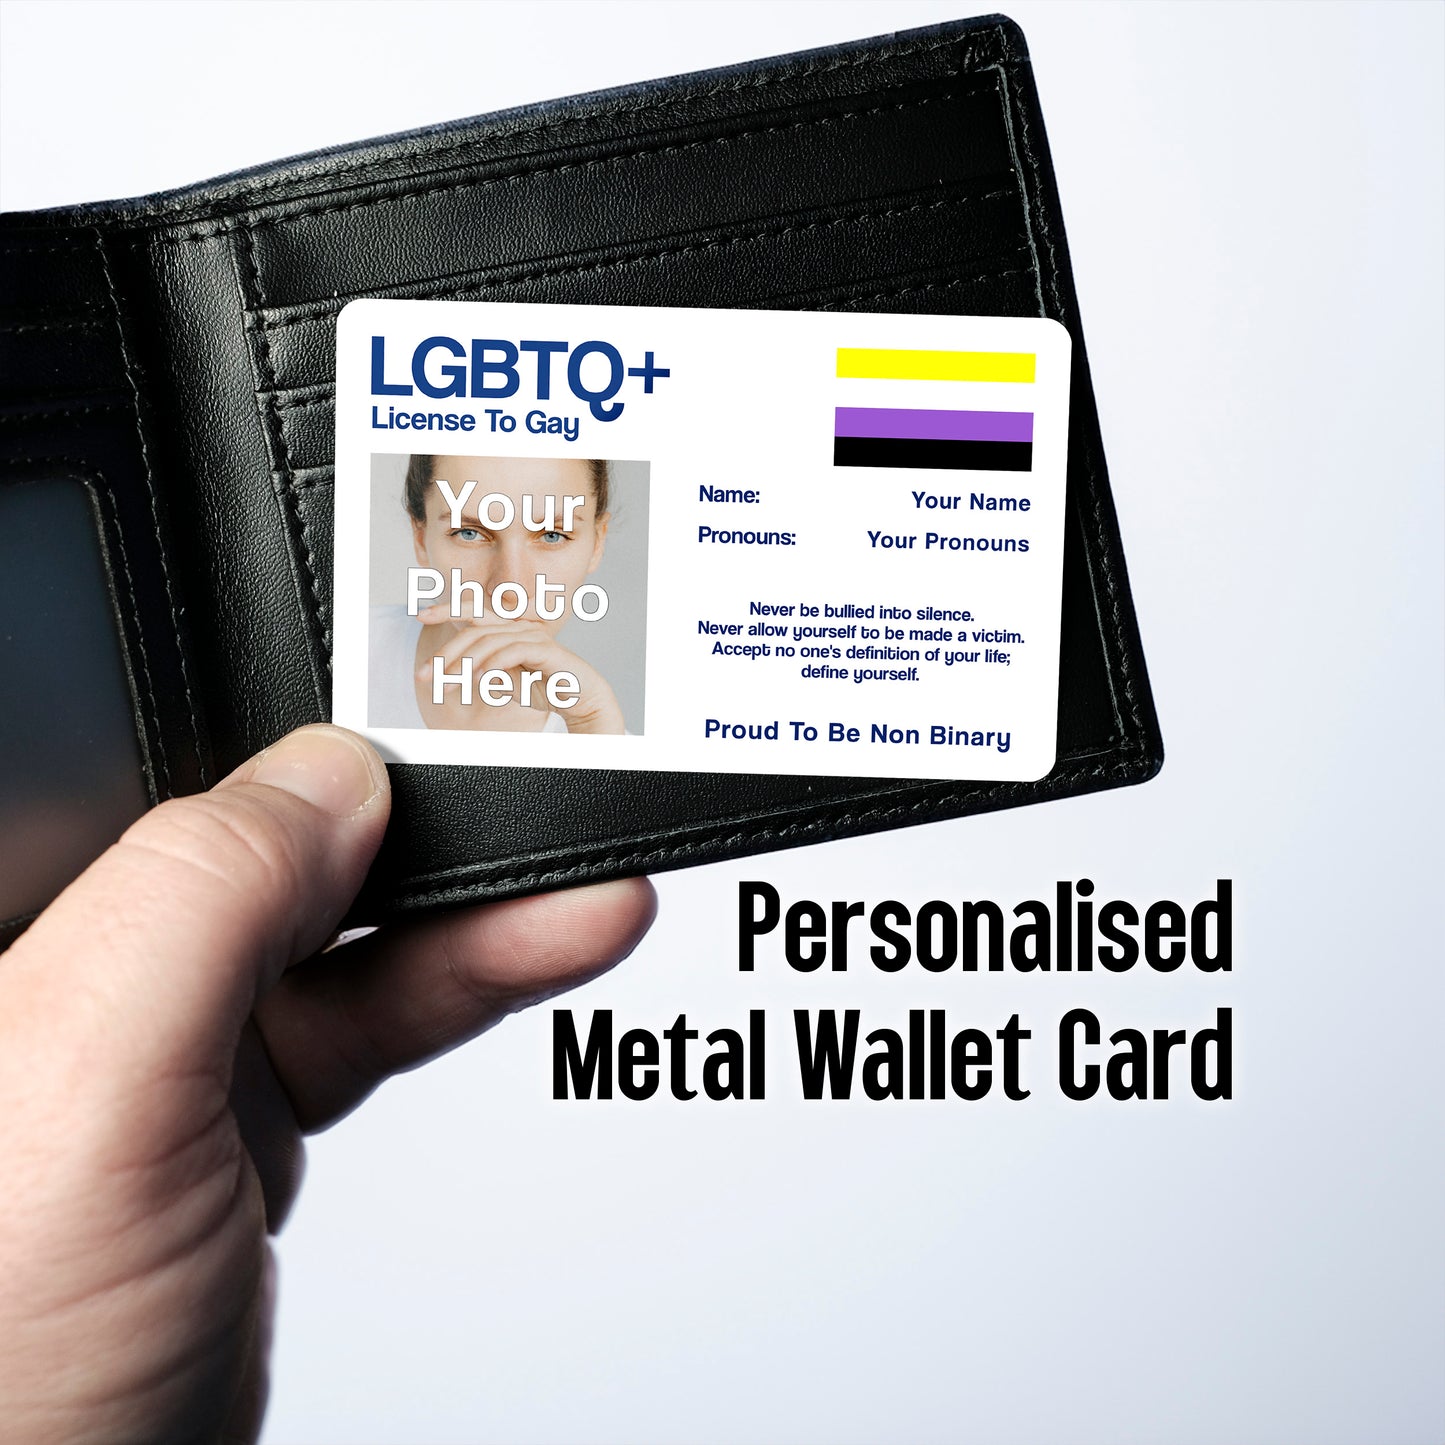 Non Binary License To Gay aluminium wallet card personalised with your name, pronouns, and photo